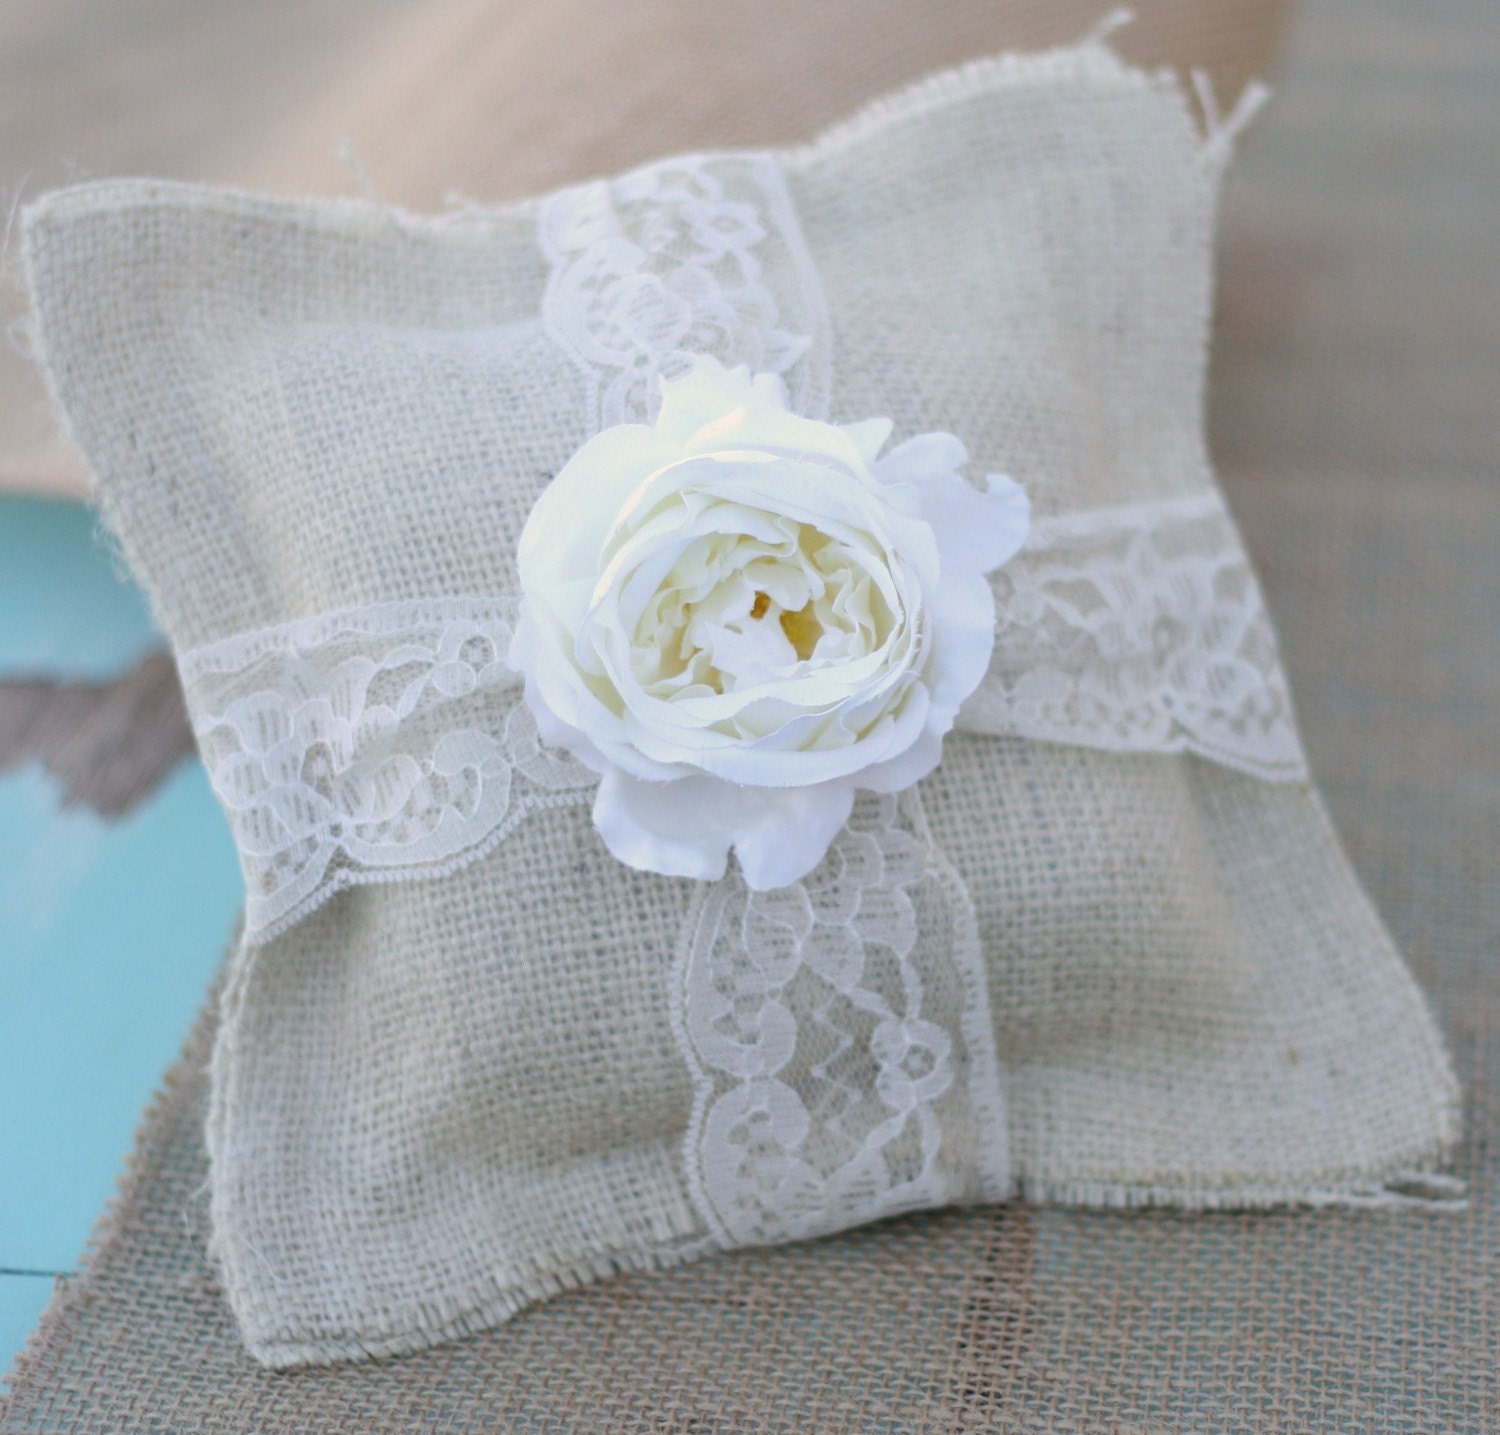 Vintage Style Rustic Spring Summer Woodland Wedding Shabby Chic Burlap Ring Bearer Pillow Antique Rose and Lace Accents